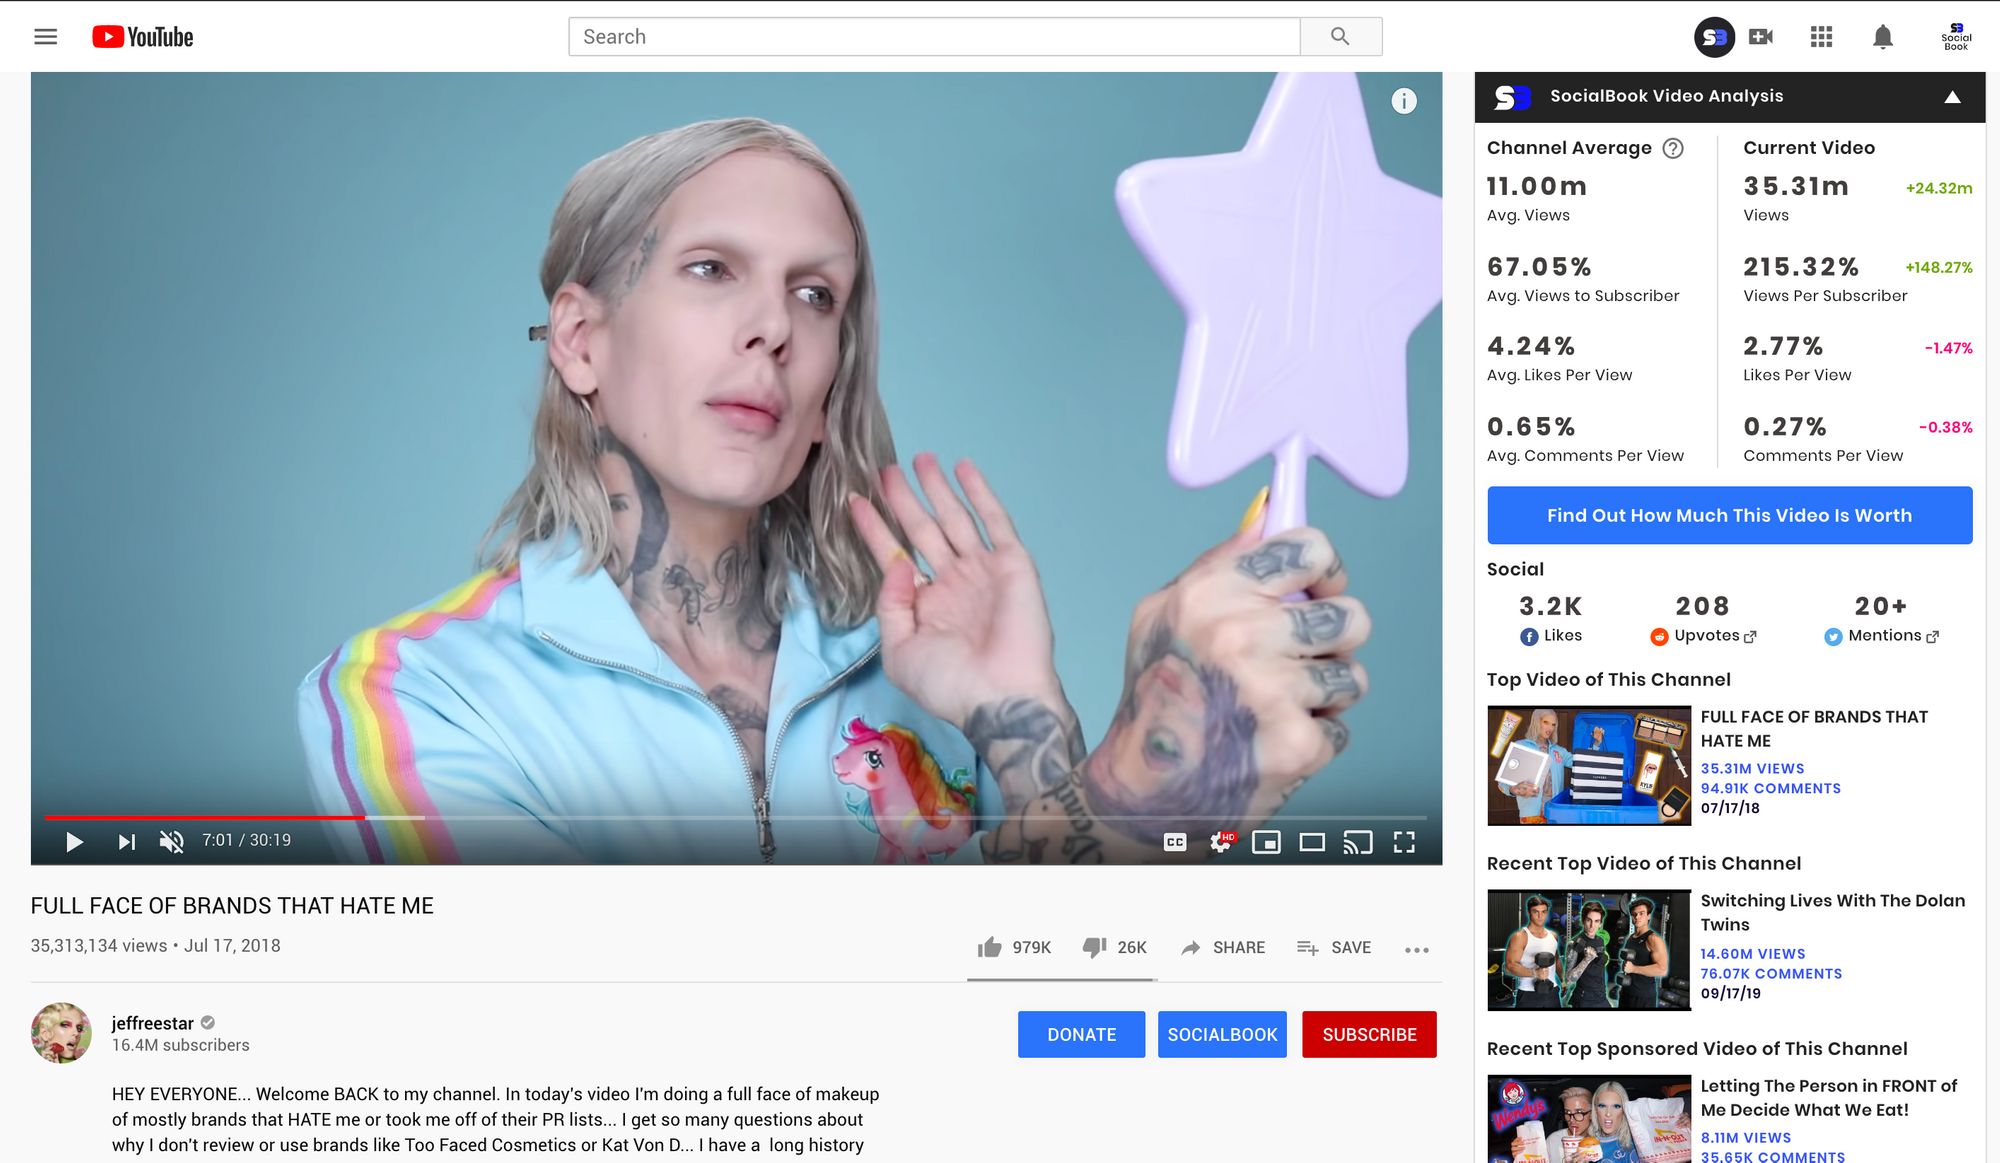 The most popular video on Jeffree Star's YouTube channel.